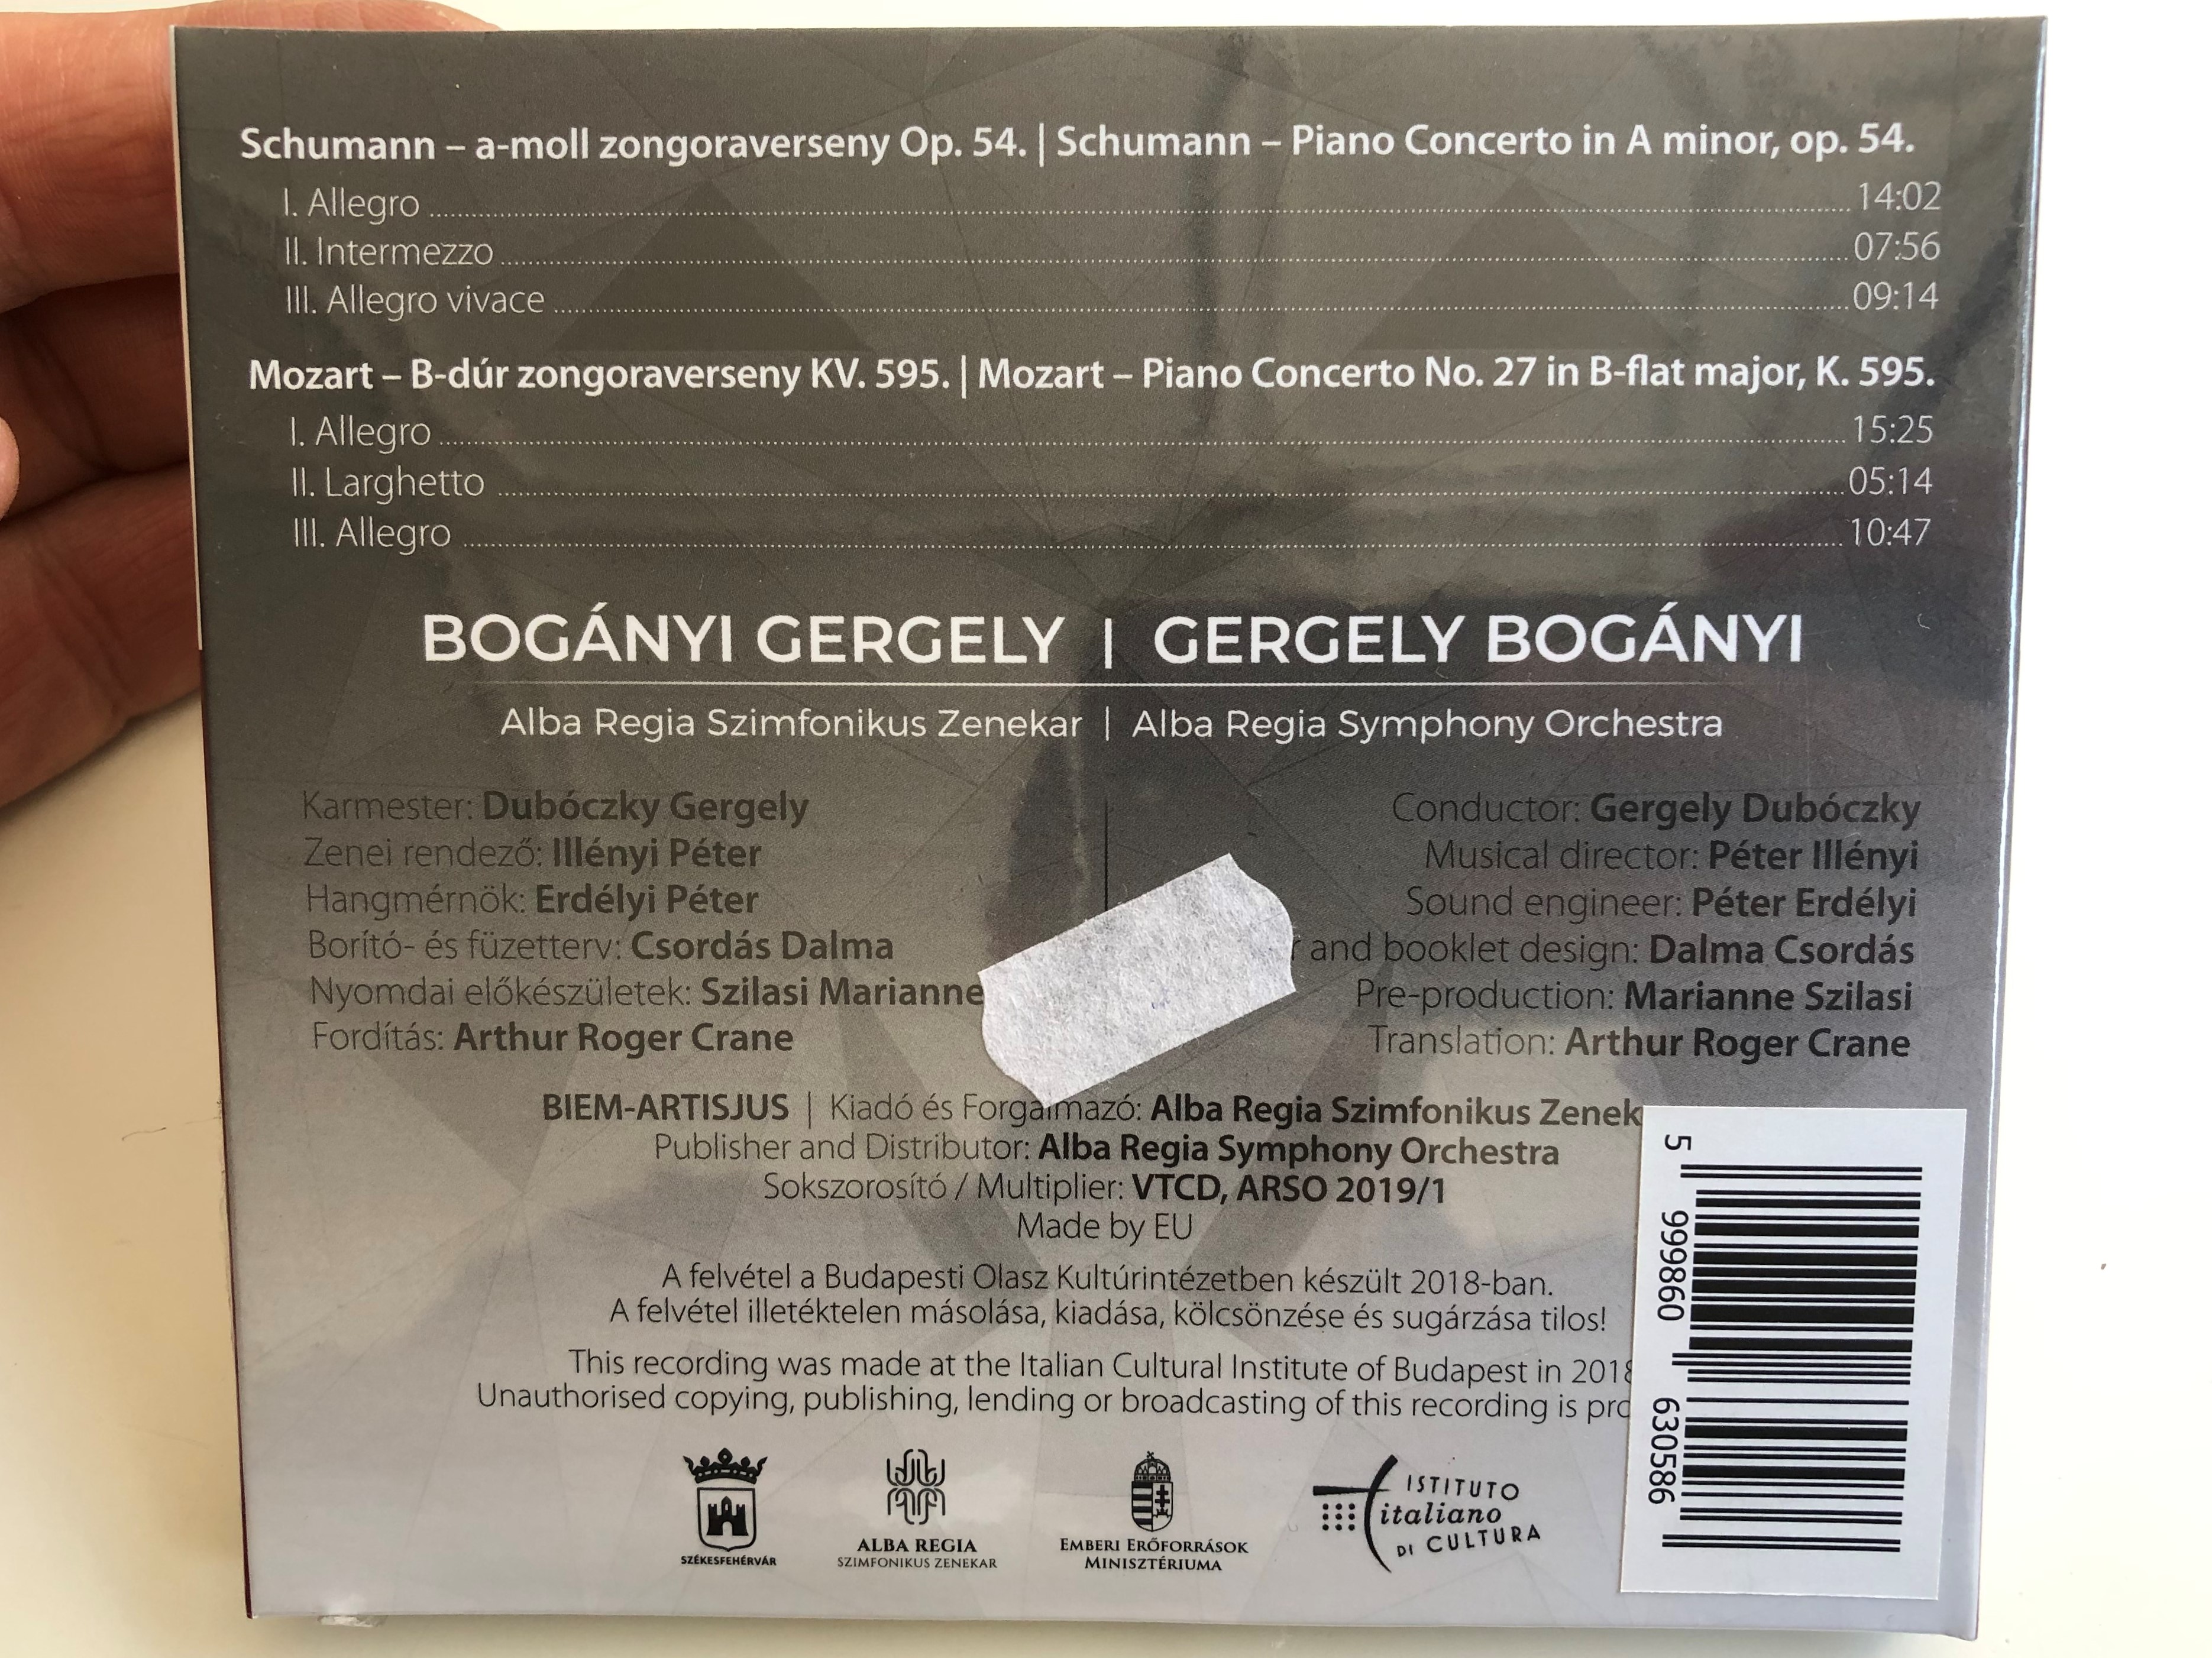 piano-concertos-by-schumann-and-mozart-gergely-boganyi-alba-regia-symphony-orchestra-conductor-gergely-duboczky-audio-cd-2018-5999860630586-2-.jpg